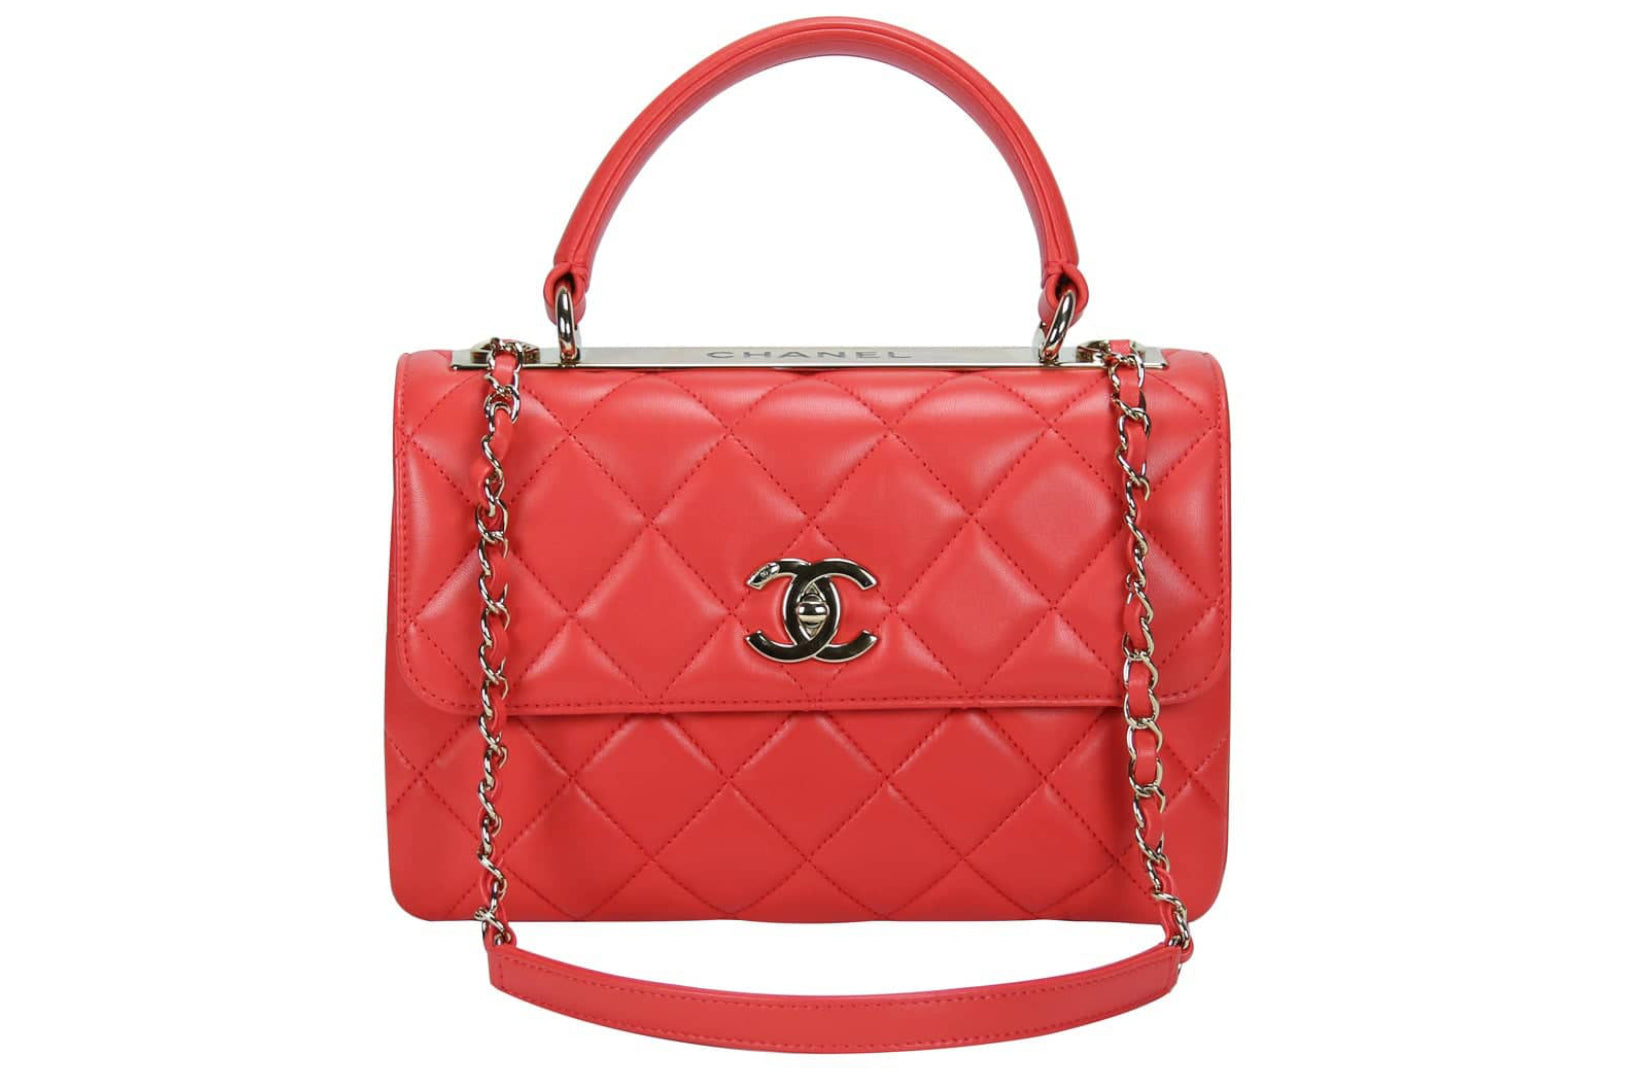 Chanel Red Leather Chic Flap Bag Small (2011)